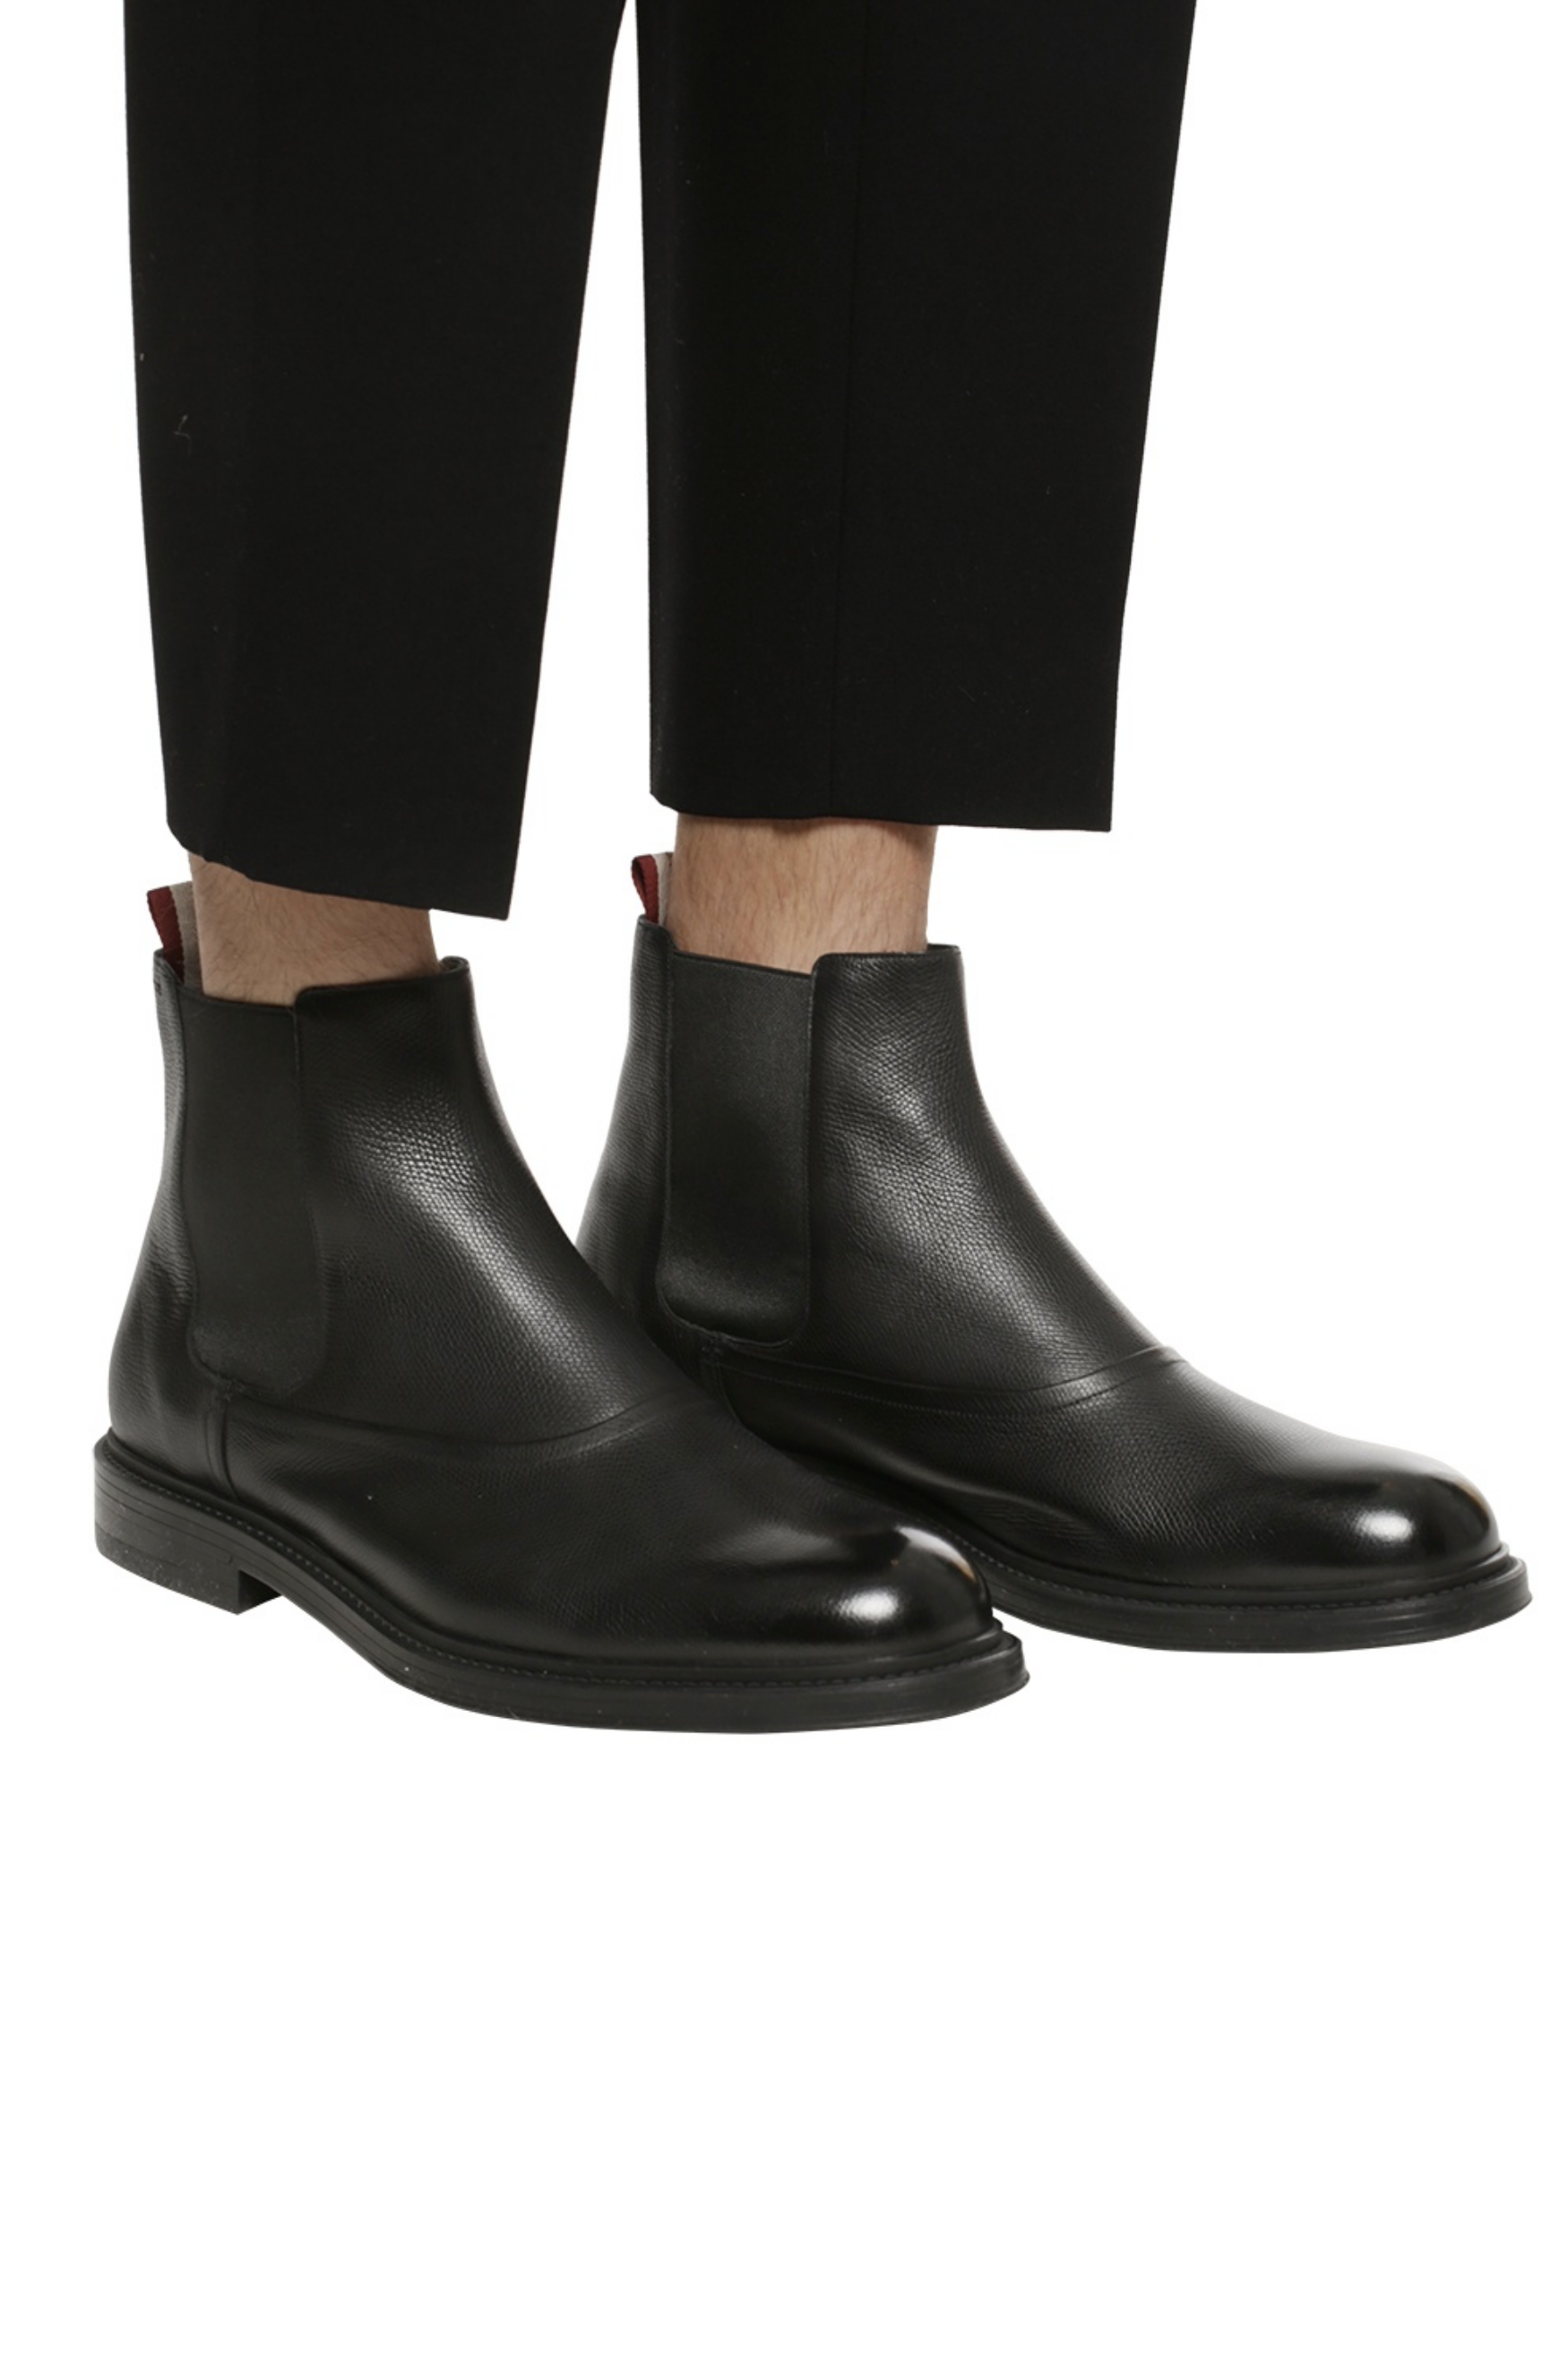 BALLY NIKORA CALF GRAINED BLACK LEATHER ANKLE BOOTS